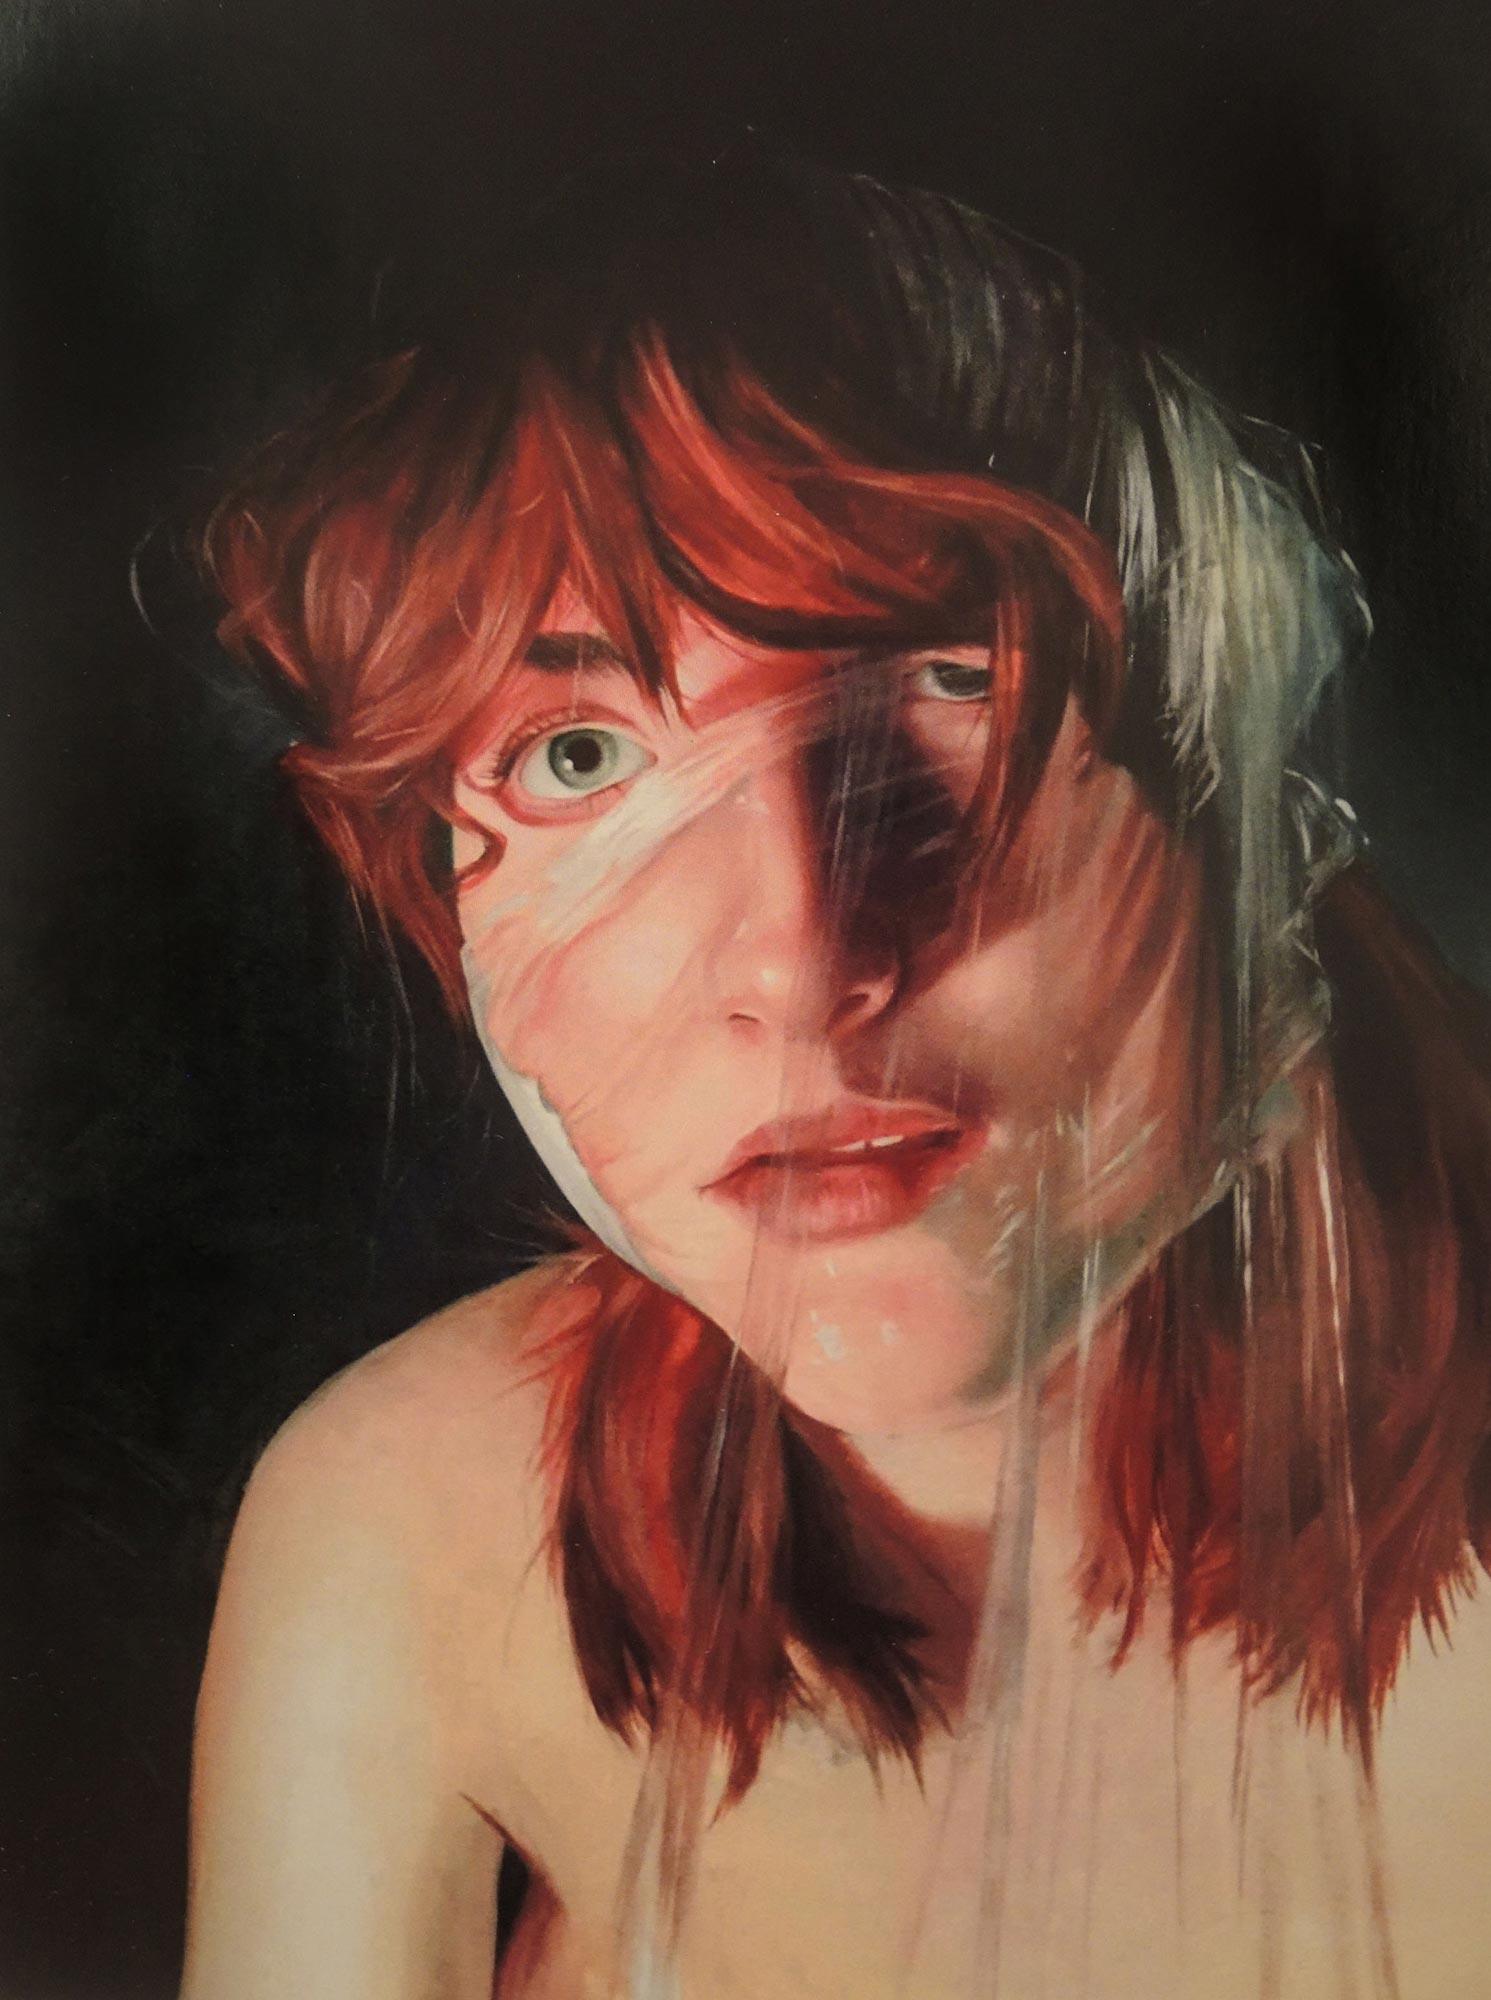 A painting of a woman with clear plastic wrapped around her head